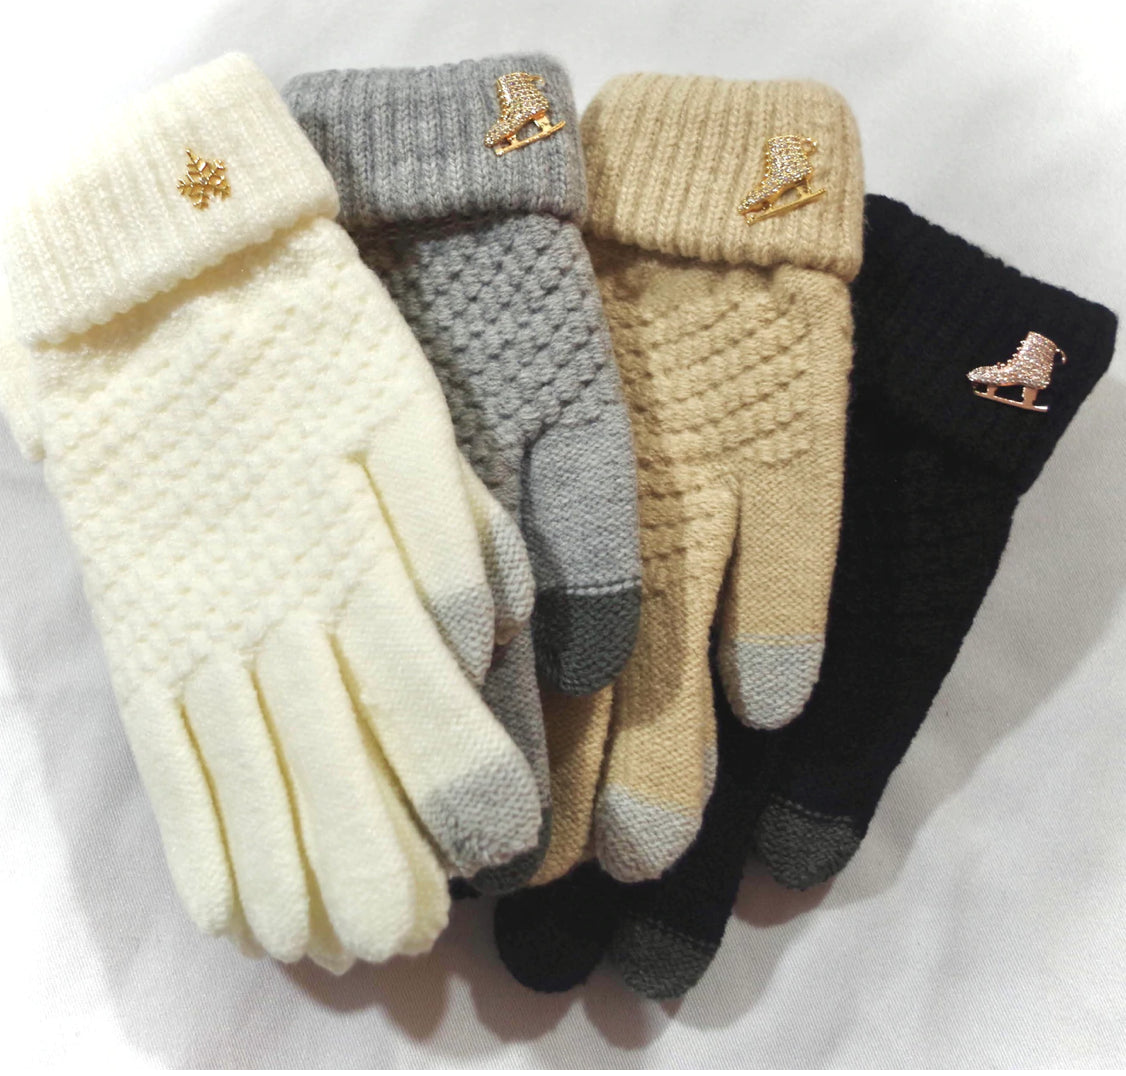 The Gliding Gloves by Brilliance & Melrose